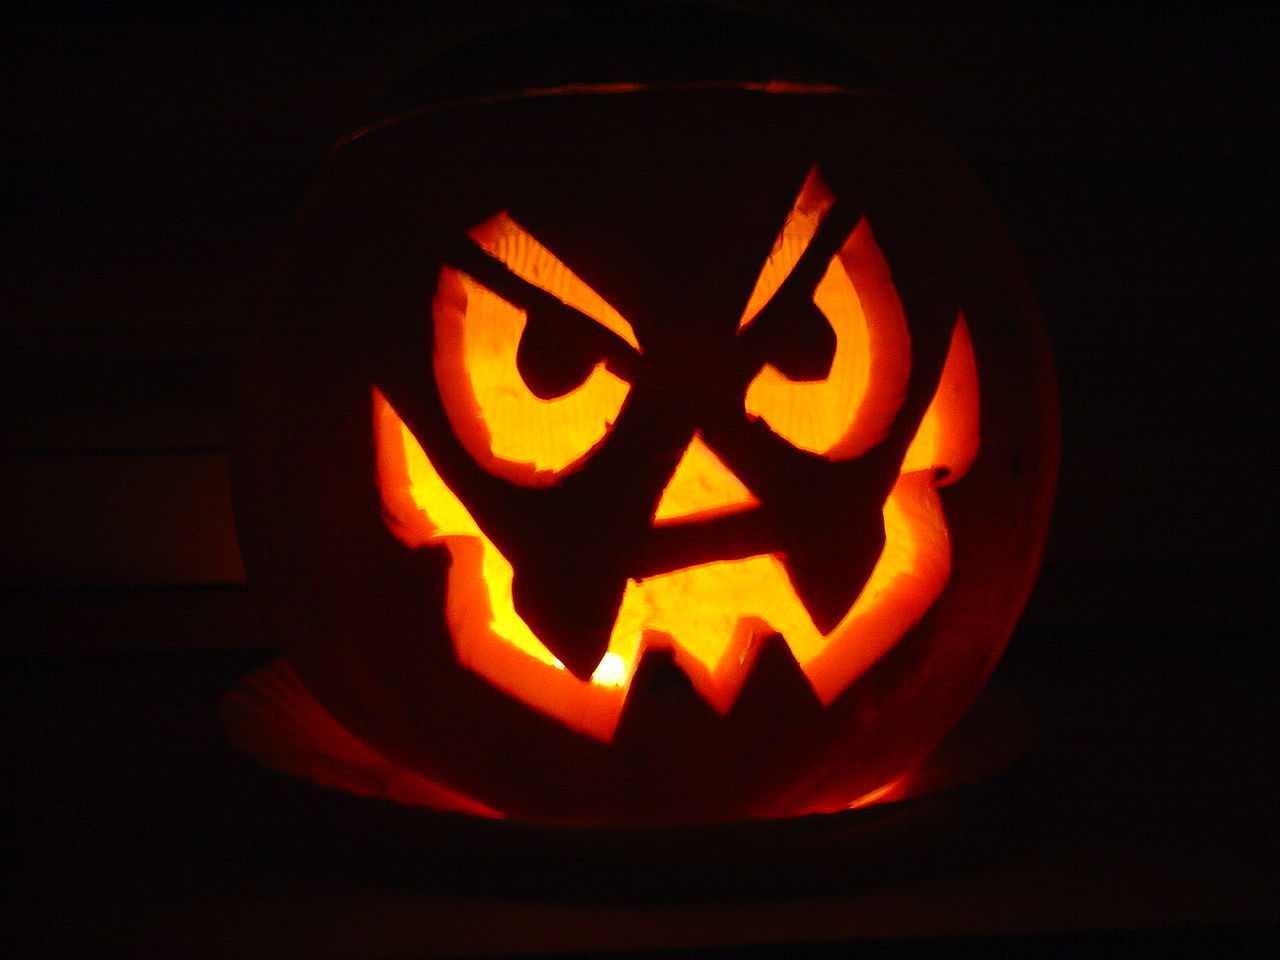 photo of an illuminated Jack O'Lantern with a michievious face carved on it